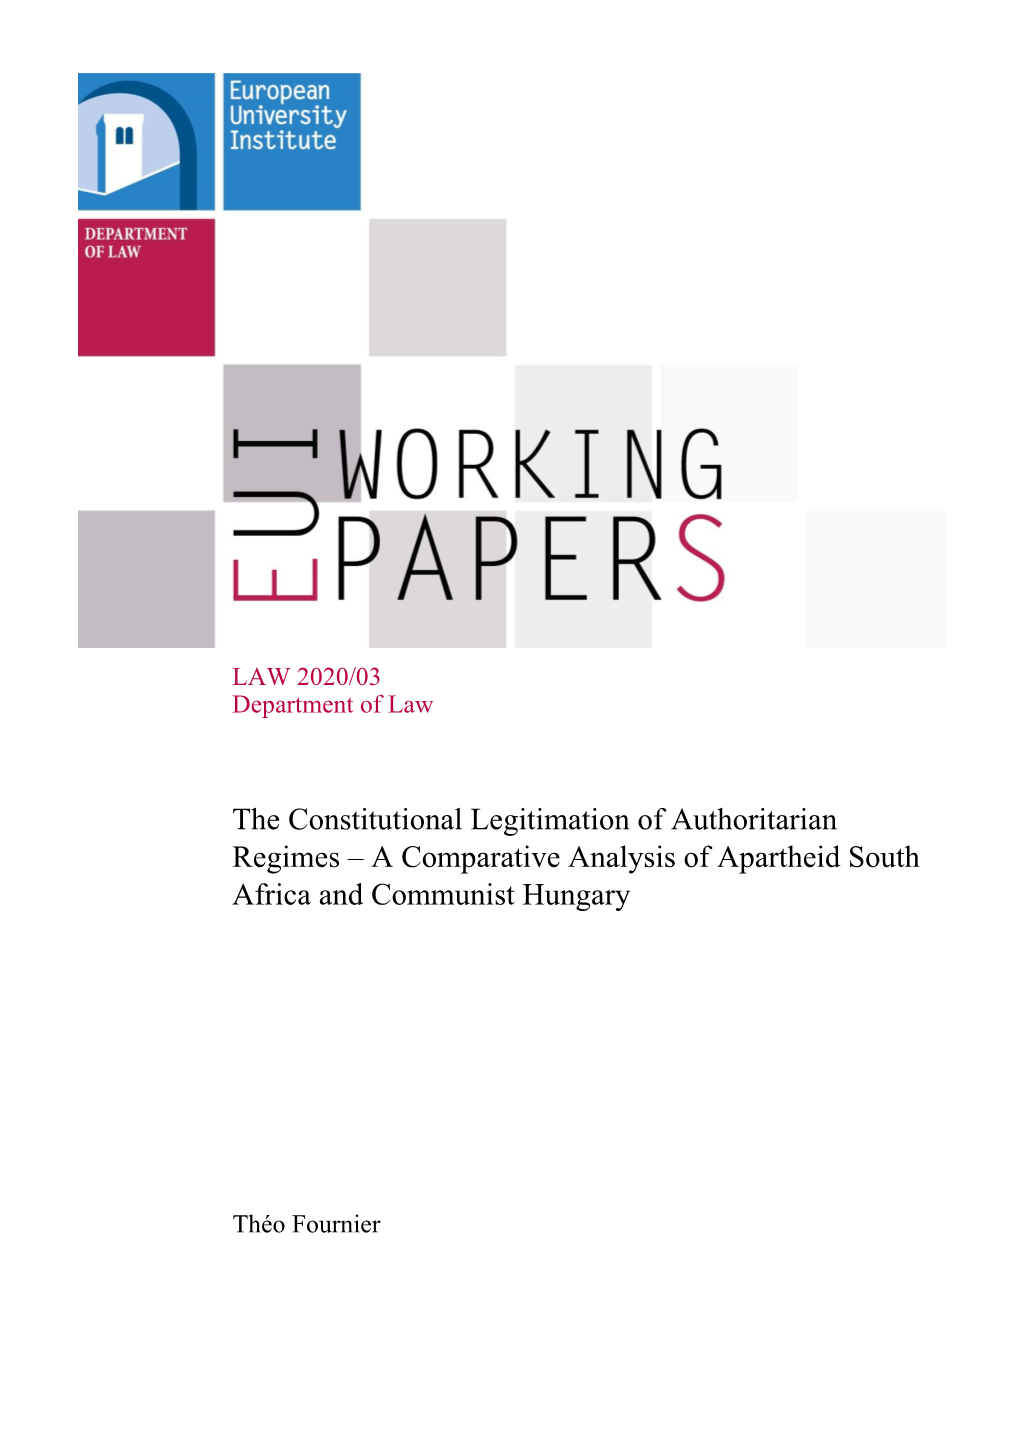 The Constitutional Legitimation of Authoritarian Regimes – a Comparative Analysis of Apartheid South Africa and Communist Hungary